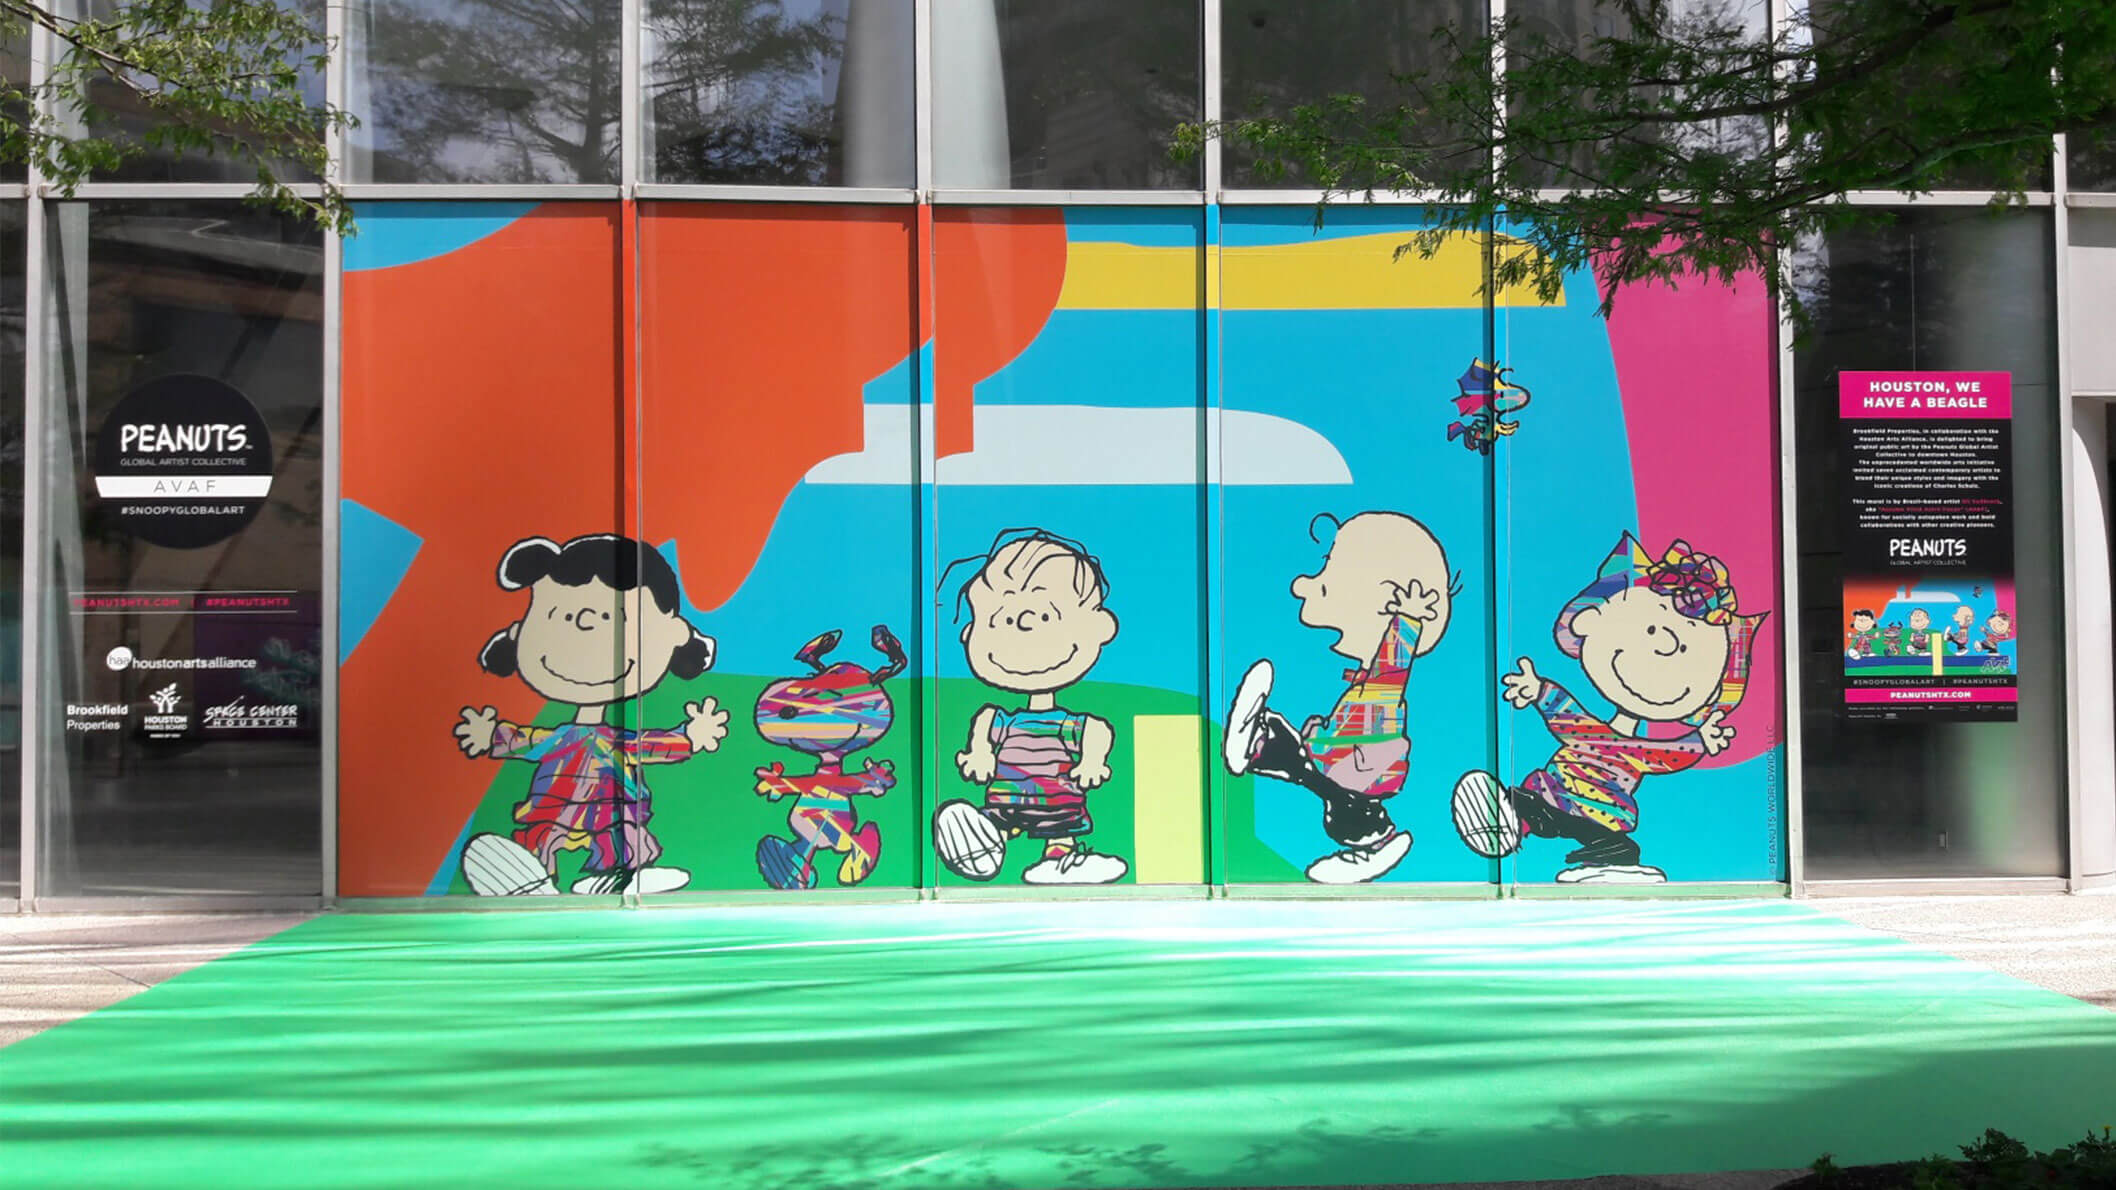 A large, colourful mural of cartoon characters on a glass window of a building.